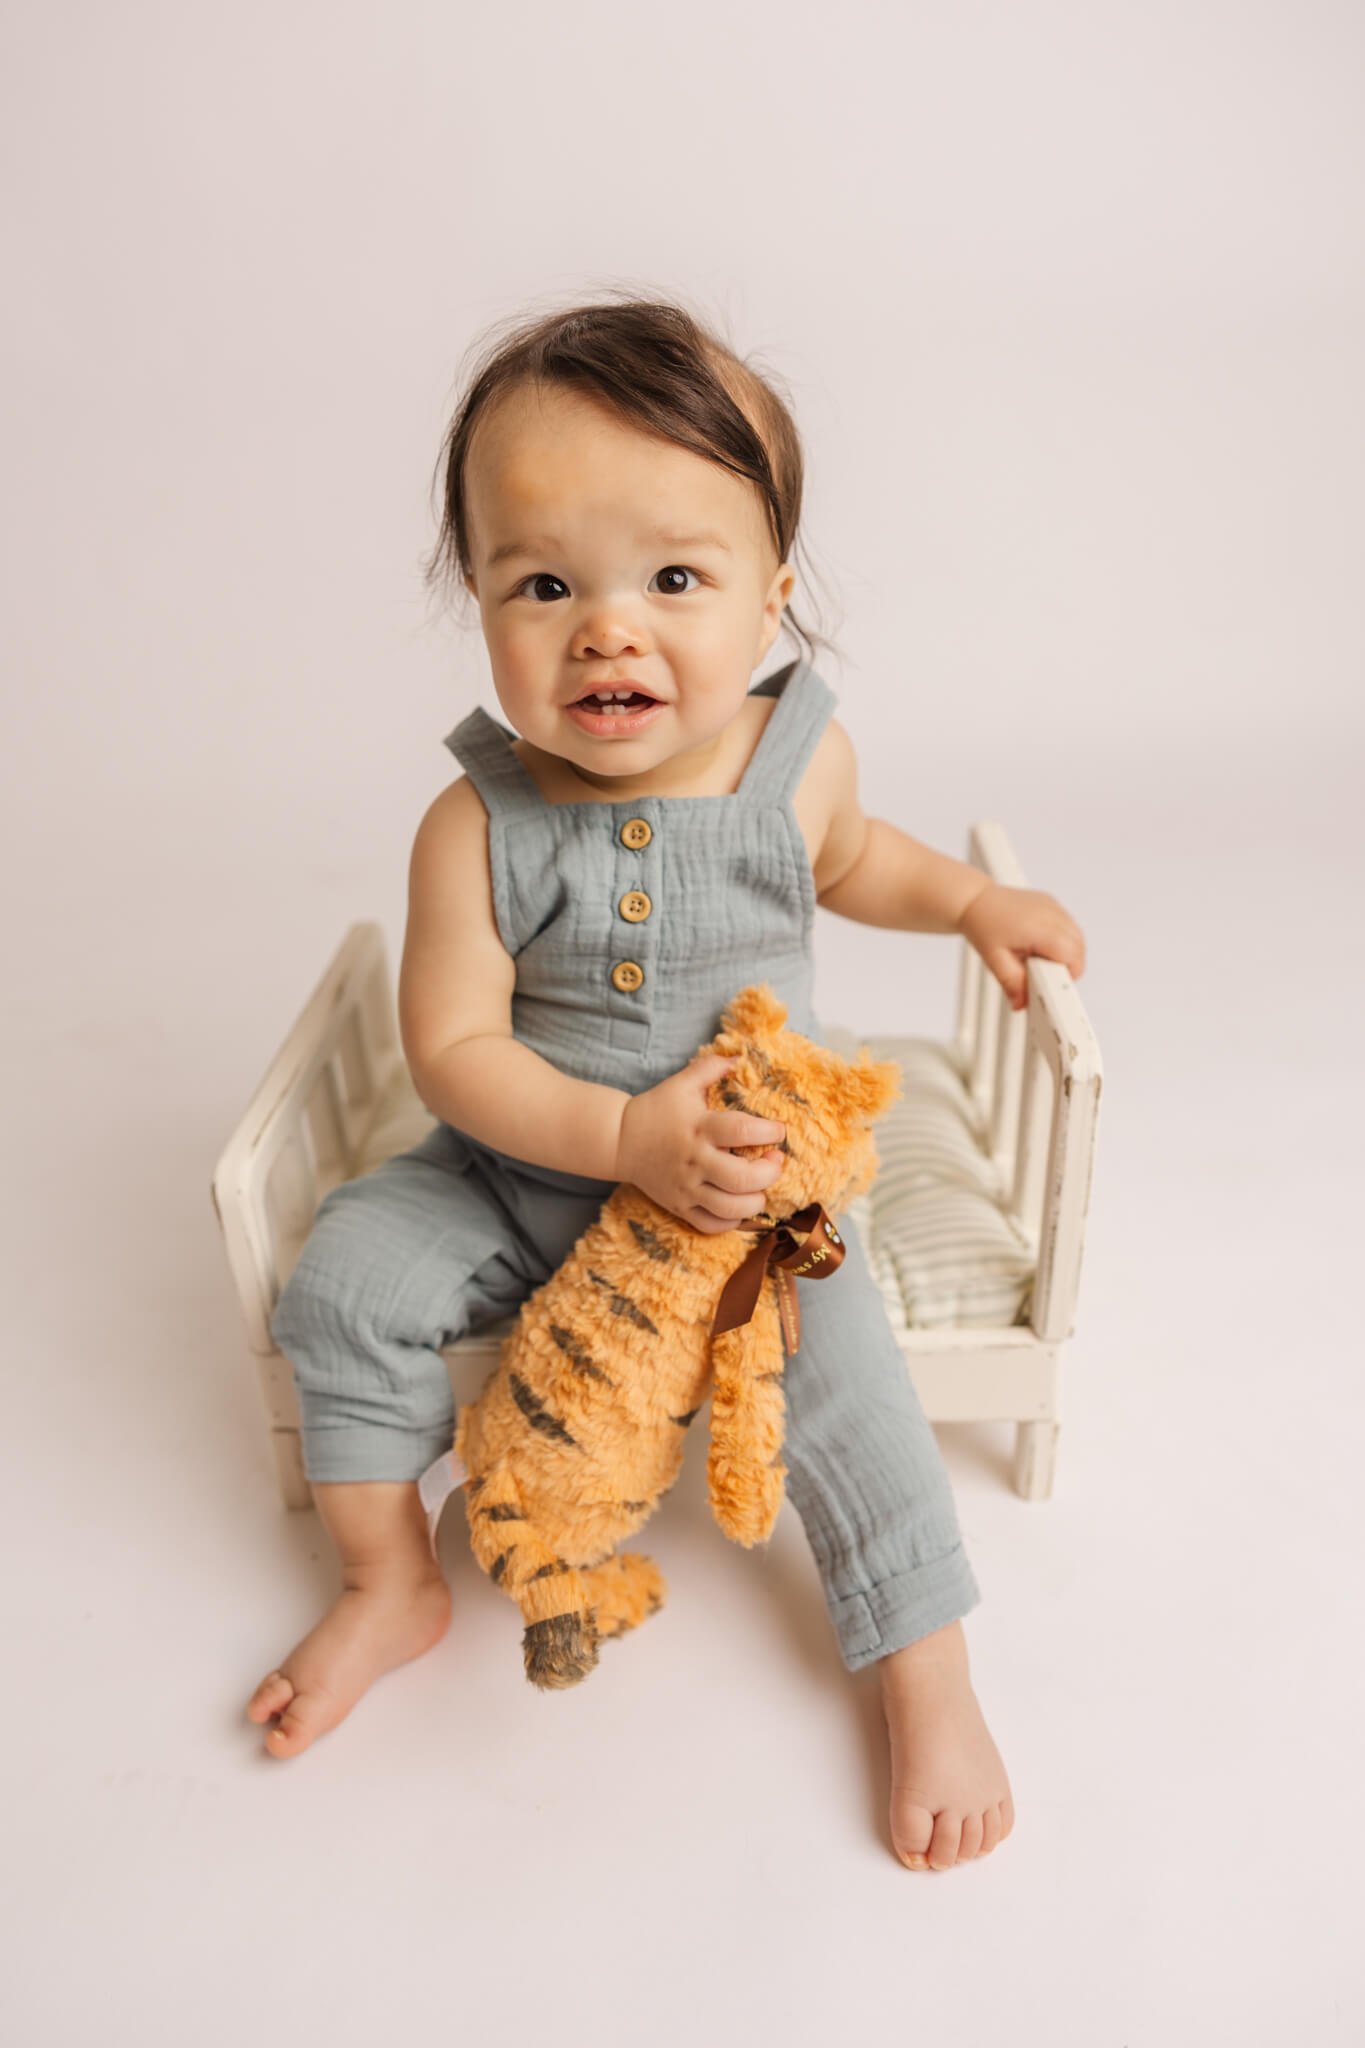 little boy in blue overalls holding a stuffed animal